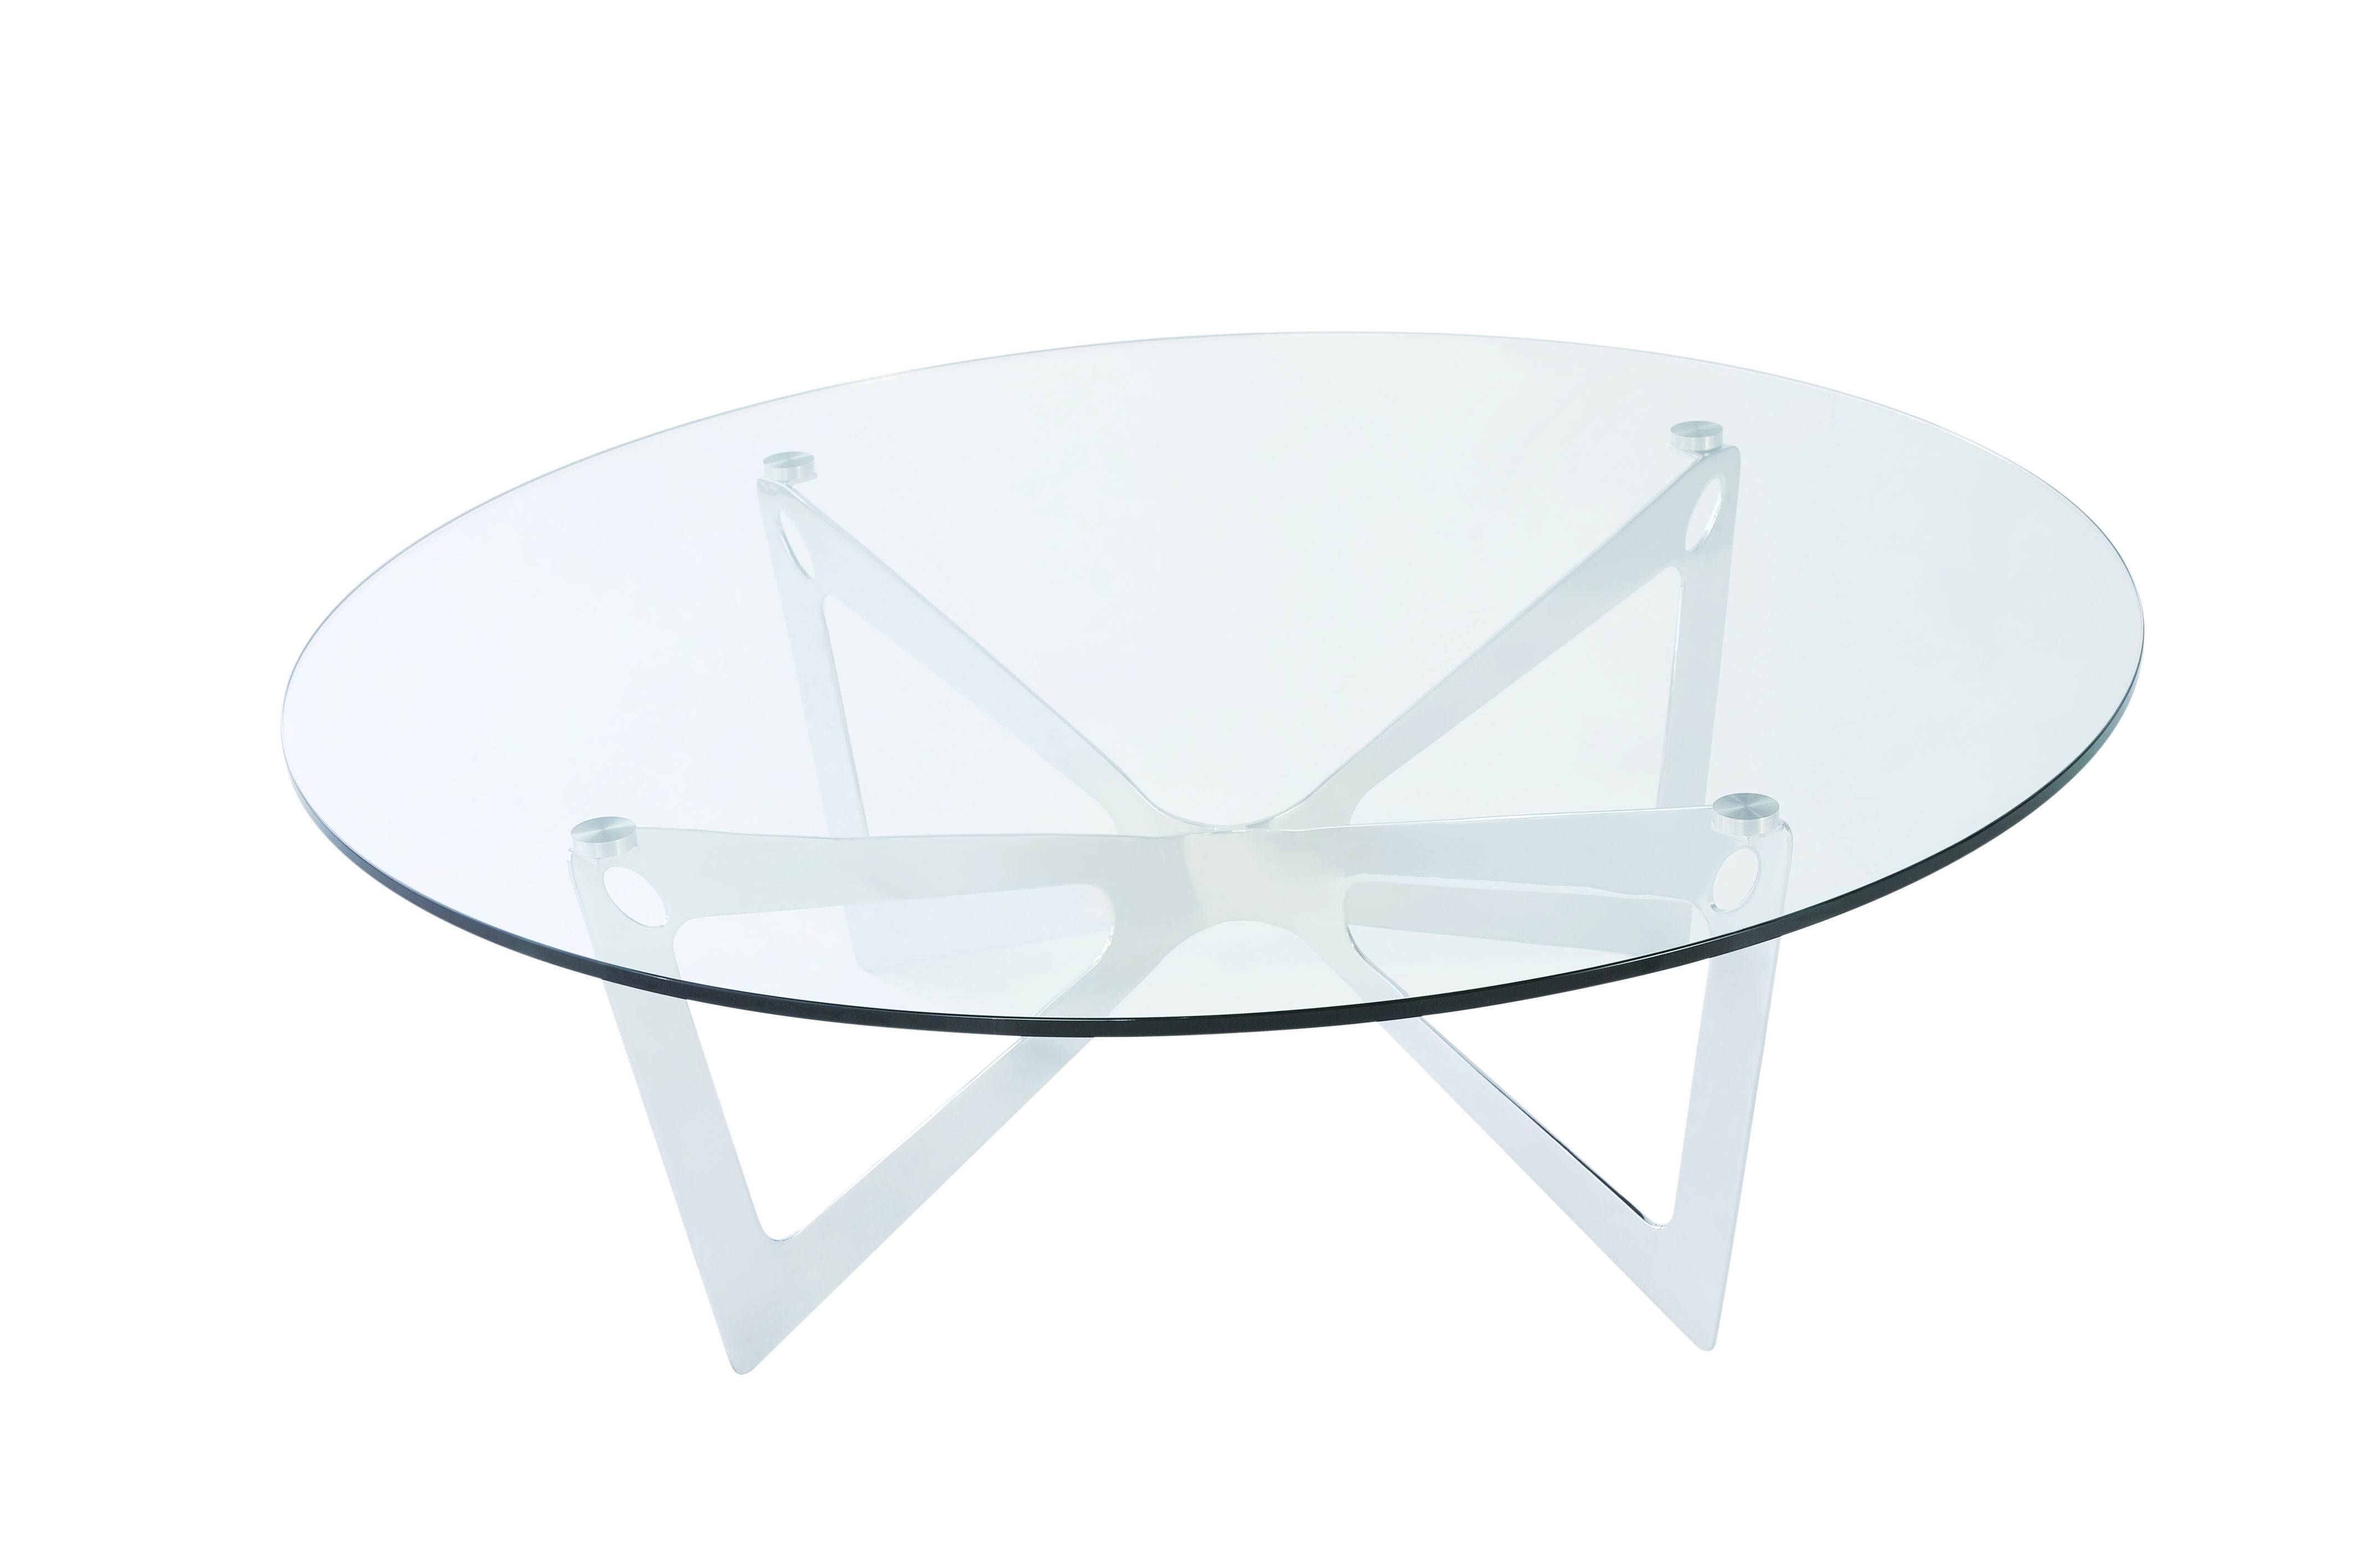 Round Glass Coffee Table With Metal Base | Coffee Tables Decoration Throughout Metal And Glass Coffee Tables (View 19 of 30)